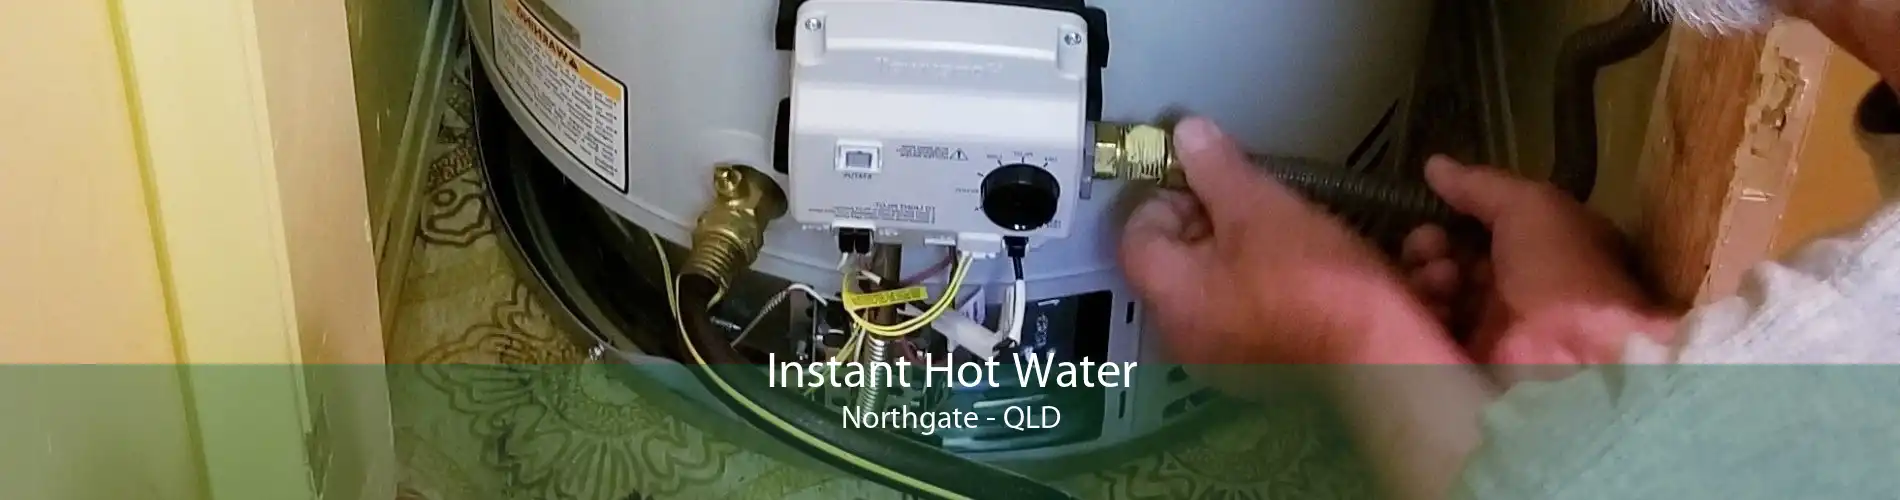 Instant Hot Water Northgate - QLD